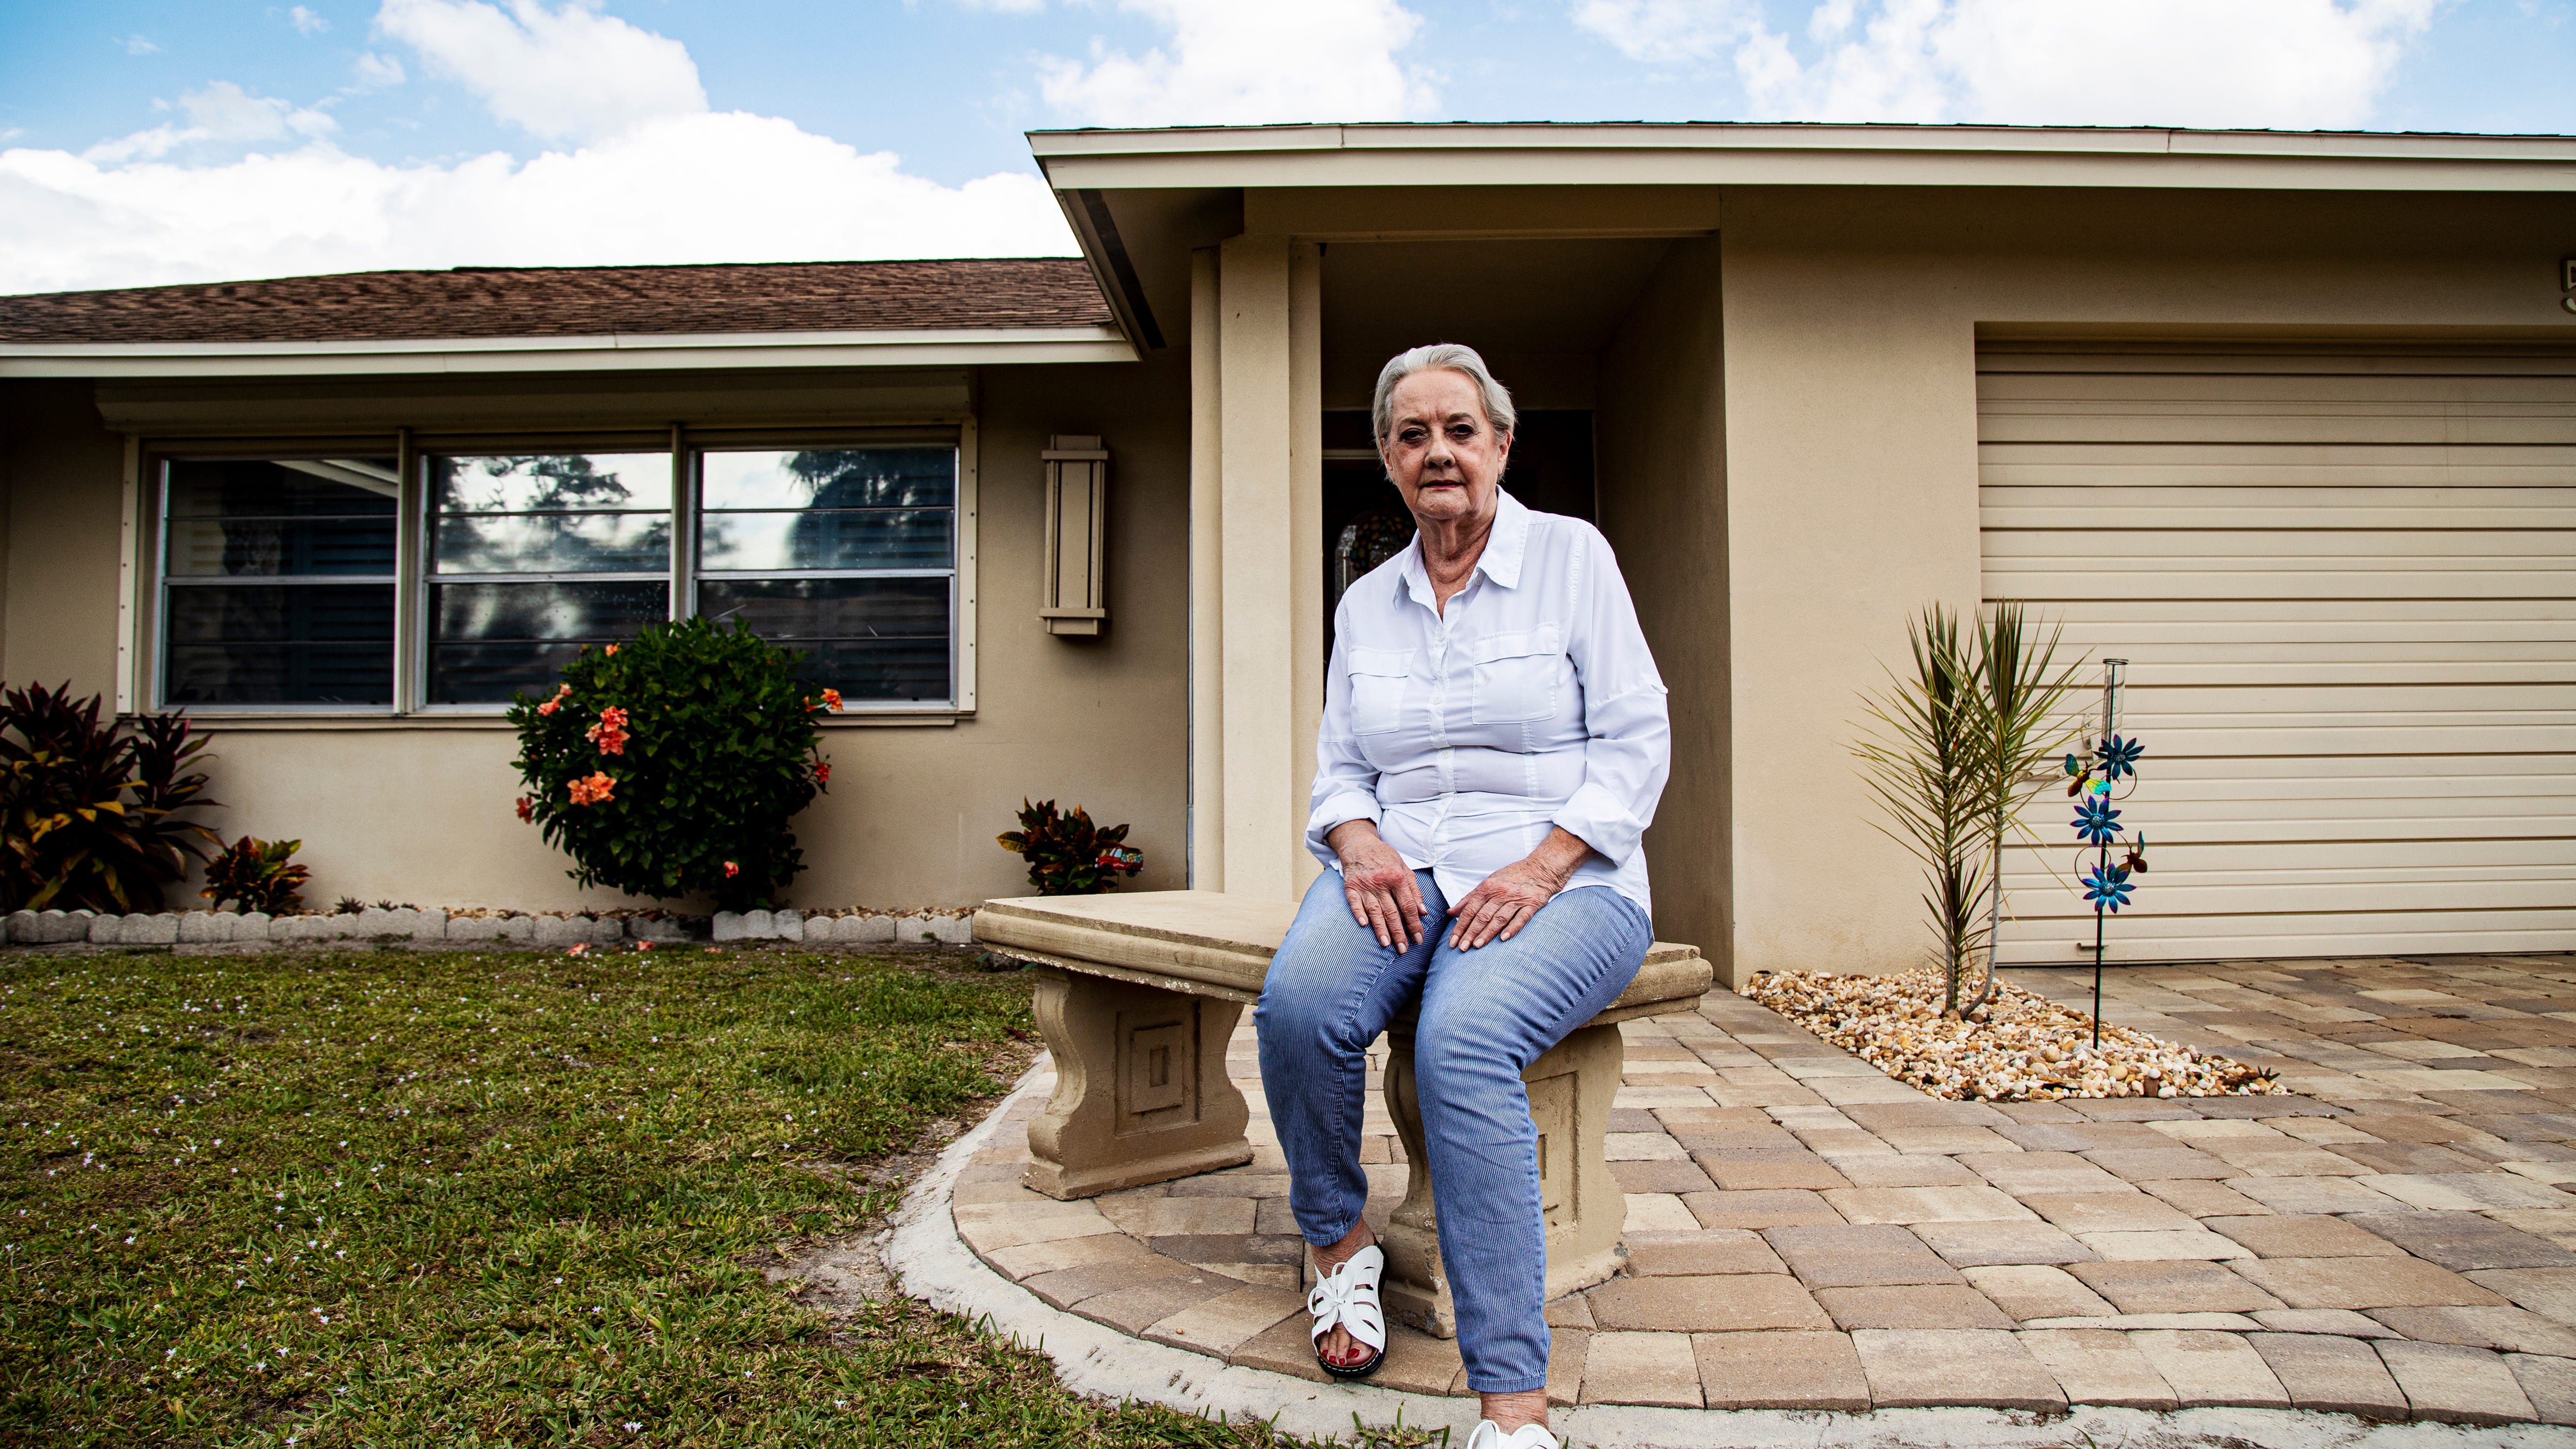 Move or go bare: Florida seniors face impossible insurance costs